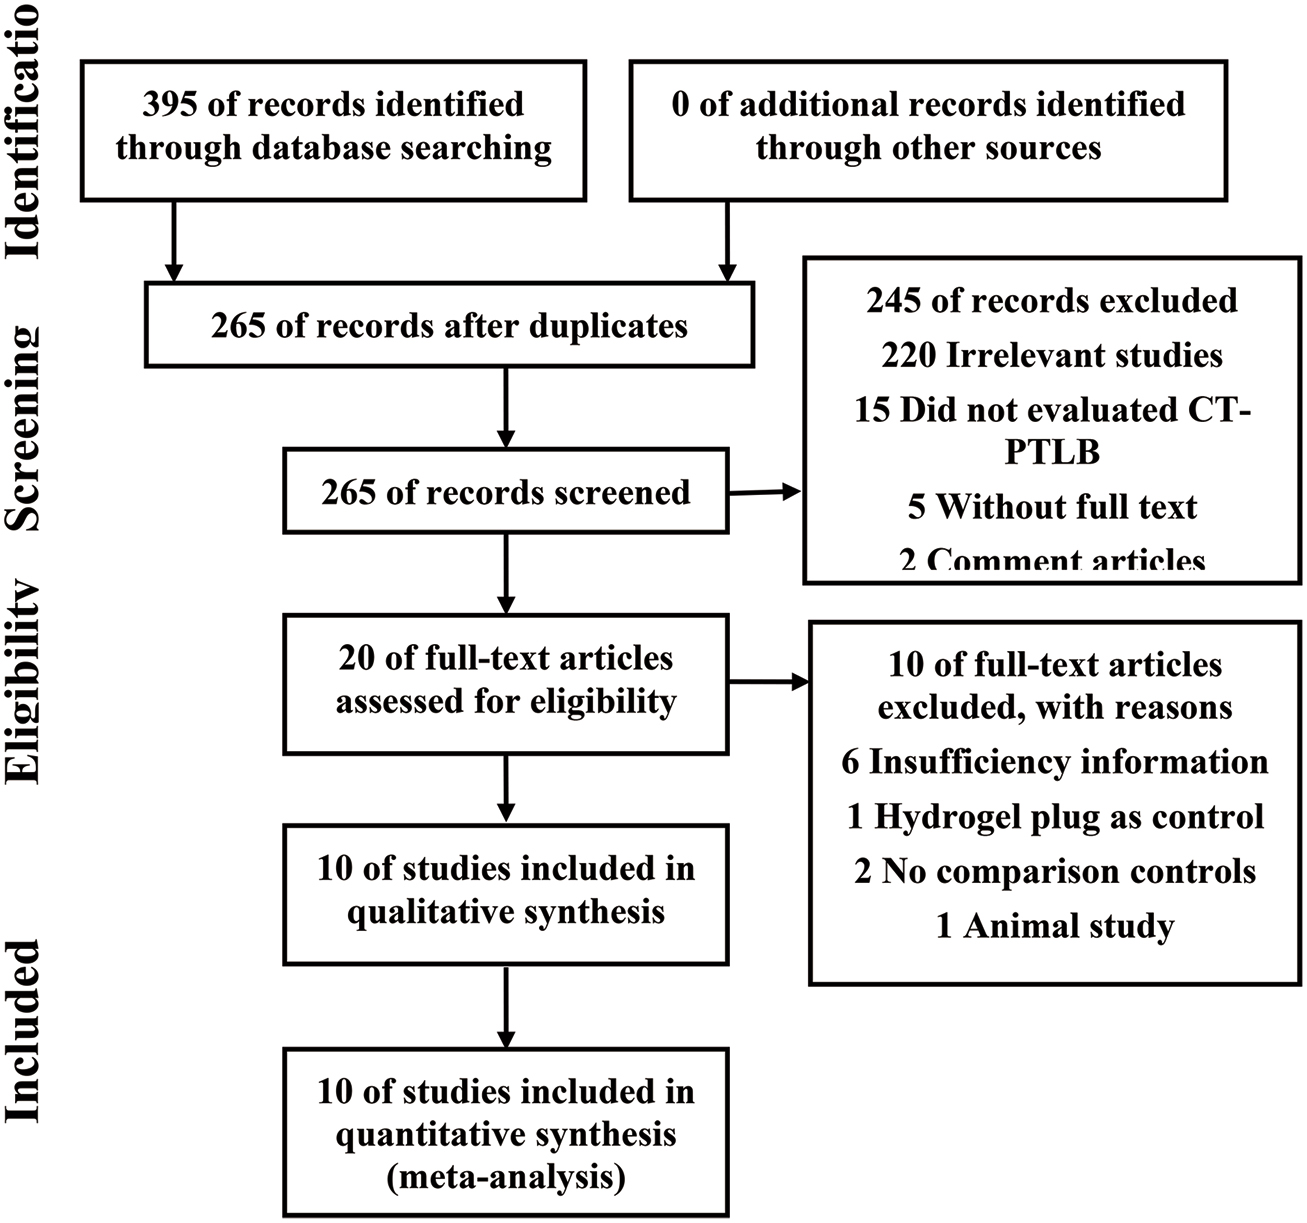 Efficacy of autologous blood patch injection for pneumothorax rate after CT-guided percutaneous transthoracic lung biopsy: a systematic review and meta-analysis